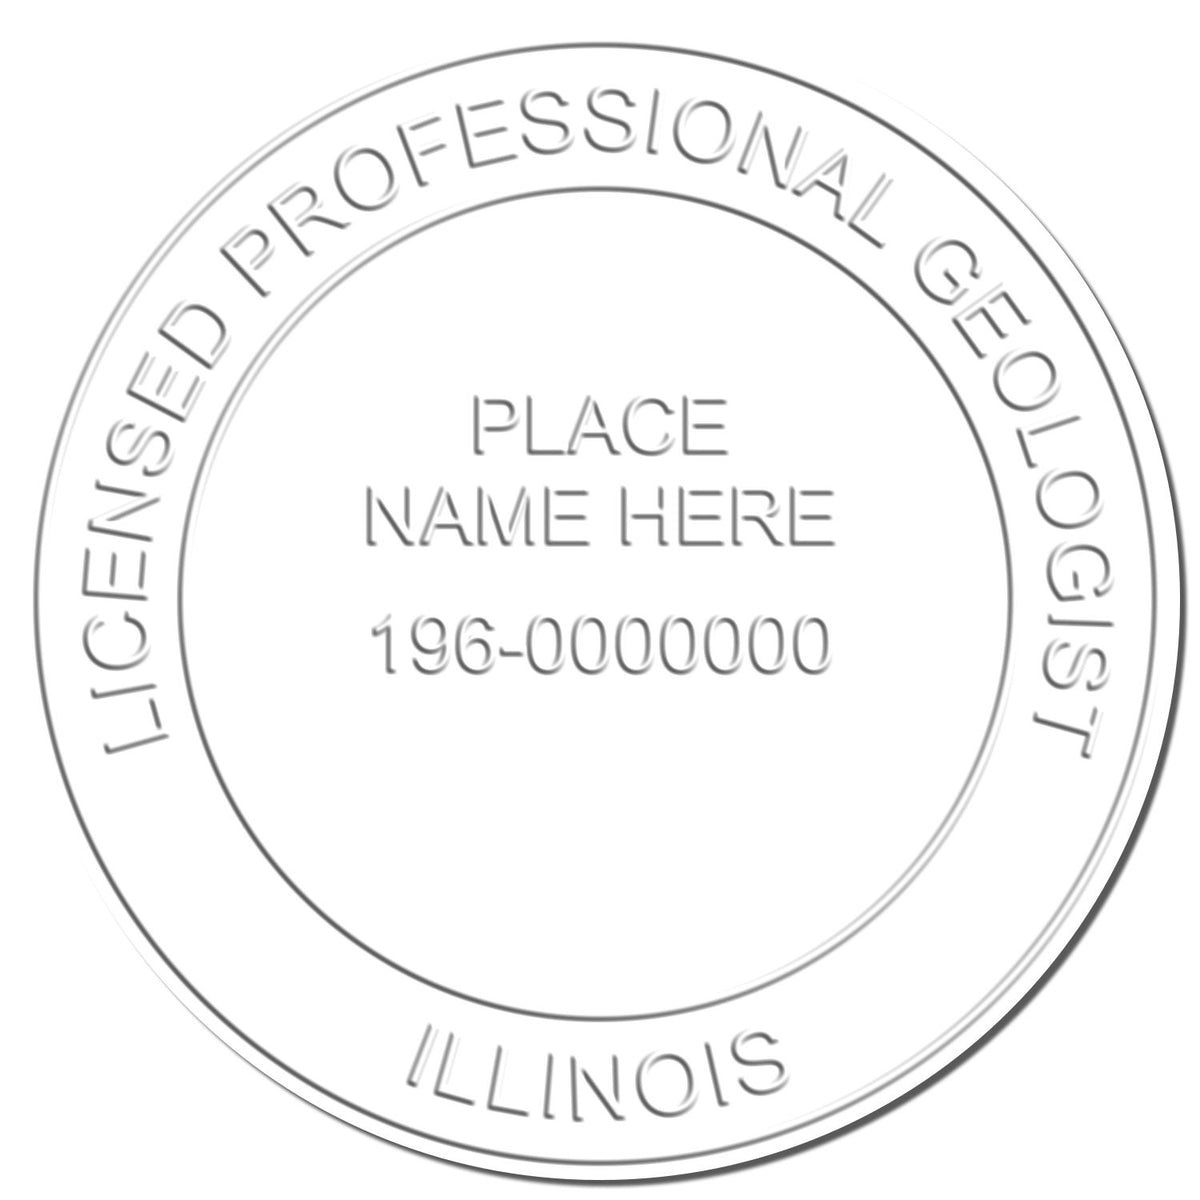 The Illinois Geologist Desk Seal stamp impression comes to life with a crisp, detailed image stamped on paper - showcasing true professional quality.